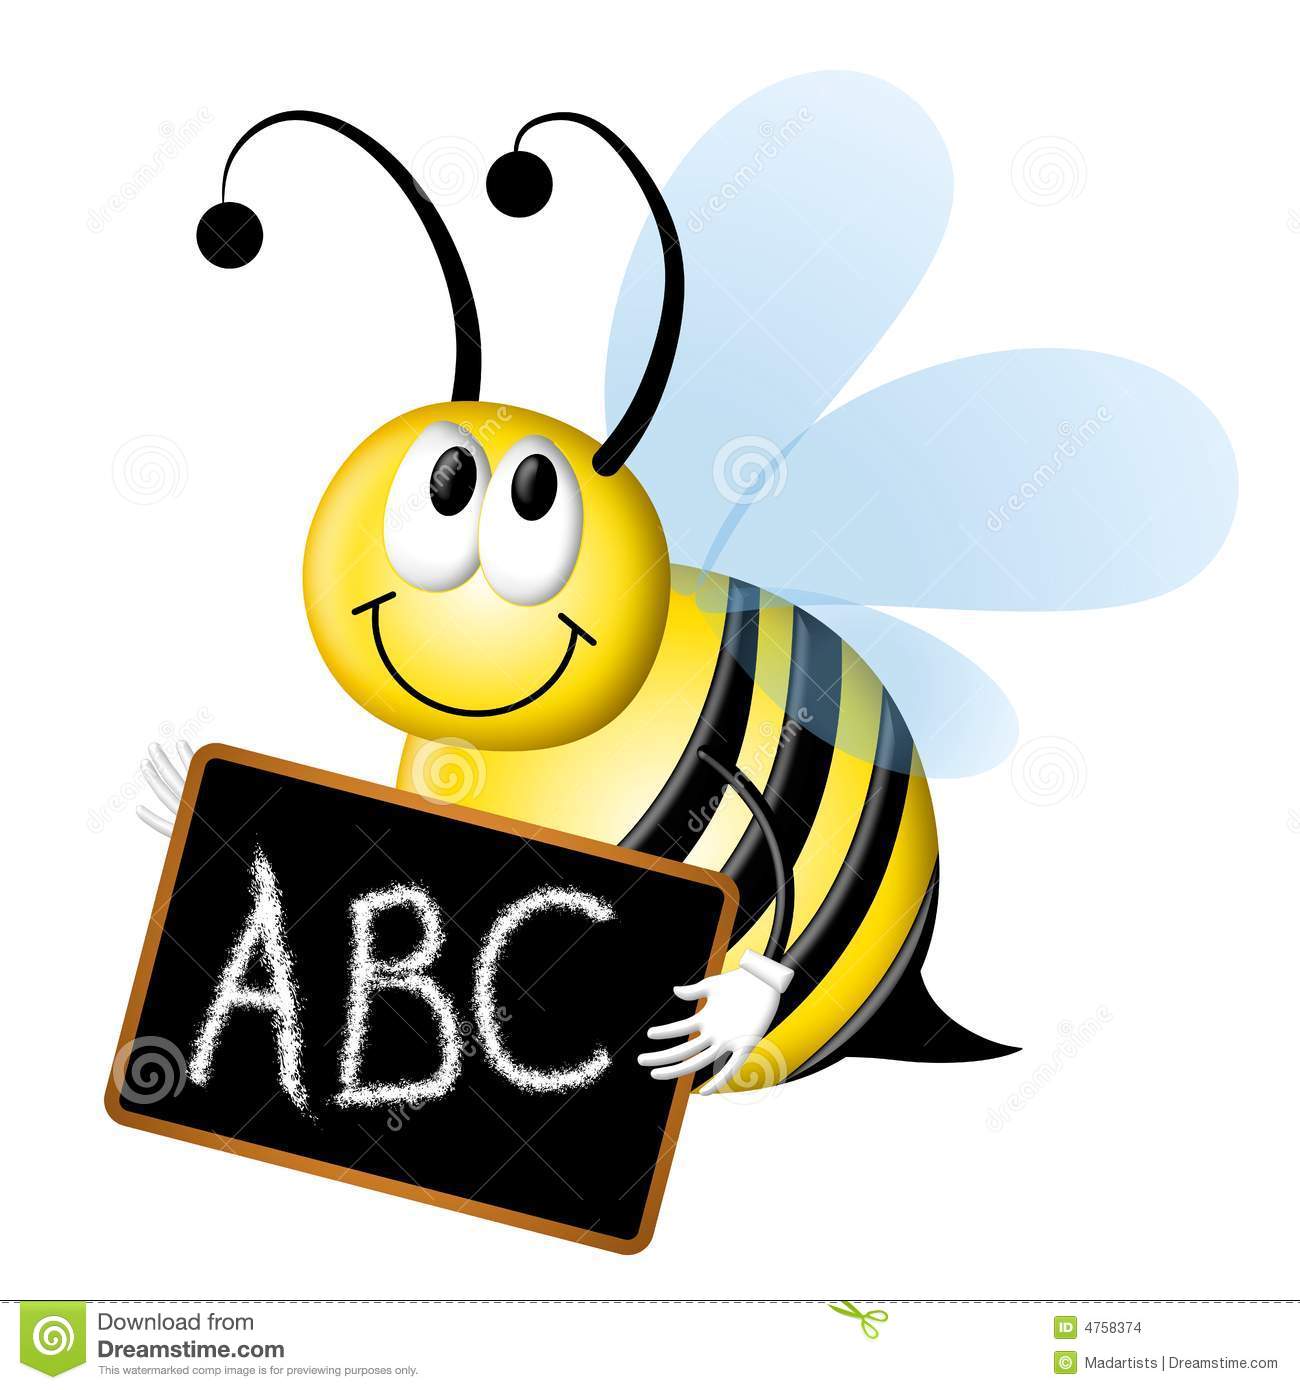 Stock Images  Spelling Bee With Abc Chalkboard  Image  4758374